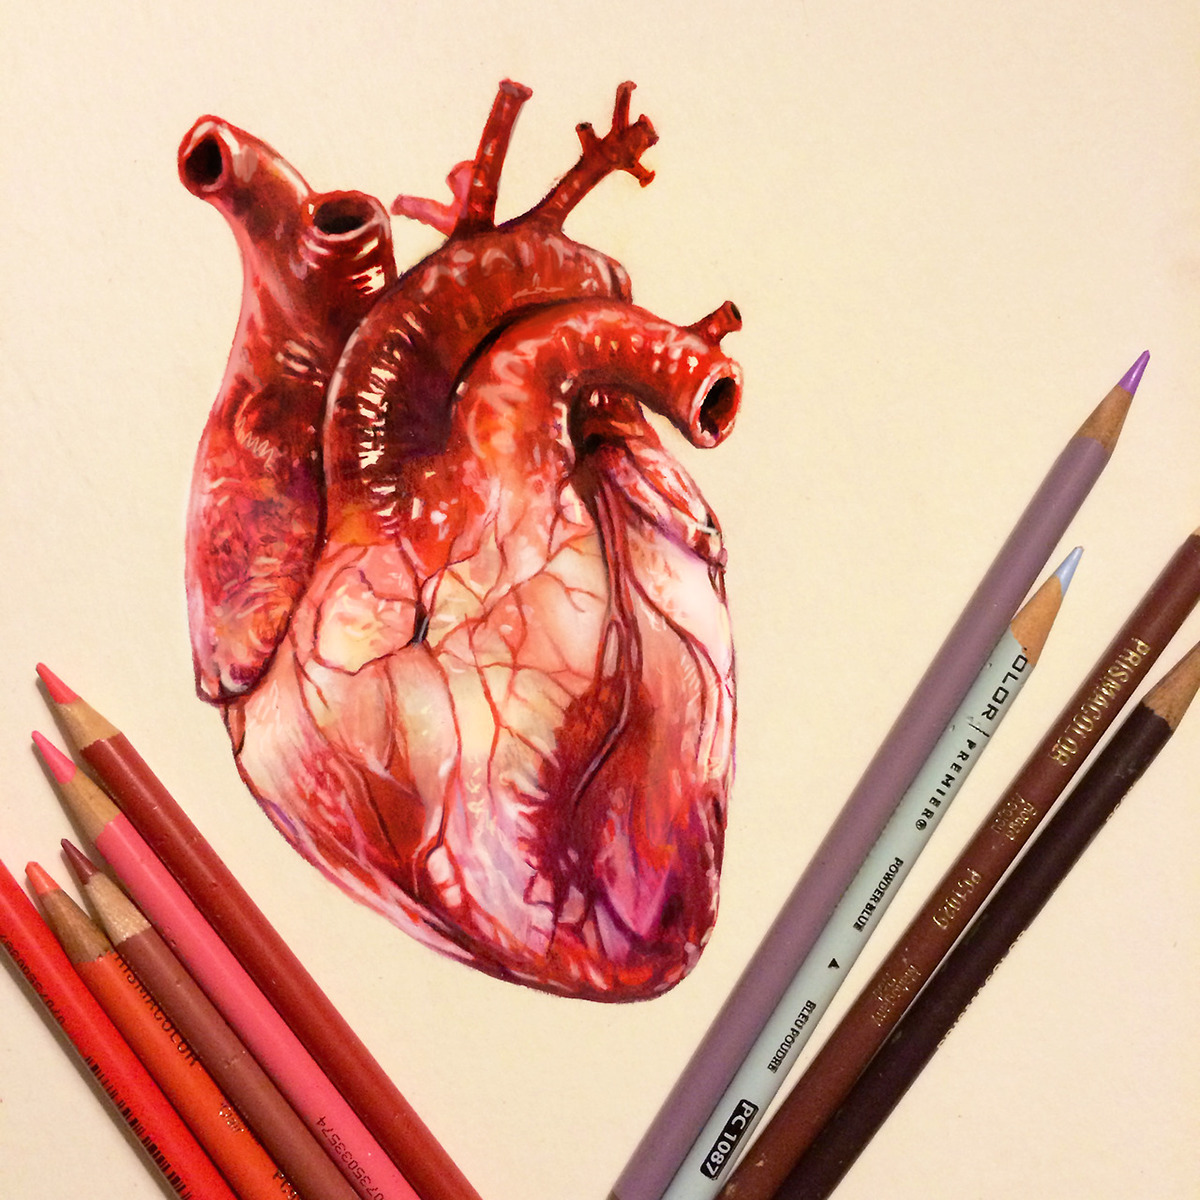 Realistic Heart Drawing ♥️✨| ✔️Rate this from 1-10 💖Double Tap💖  ➖➖➖➖➖➖➖➖➖➖➖➖➖➖➖➖➖➖ Artist 🎨 : @sfkhanvisuals Check out their page and… |  Instagram